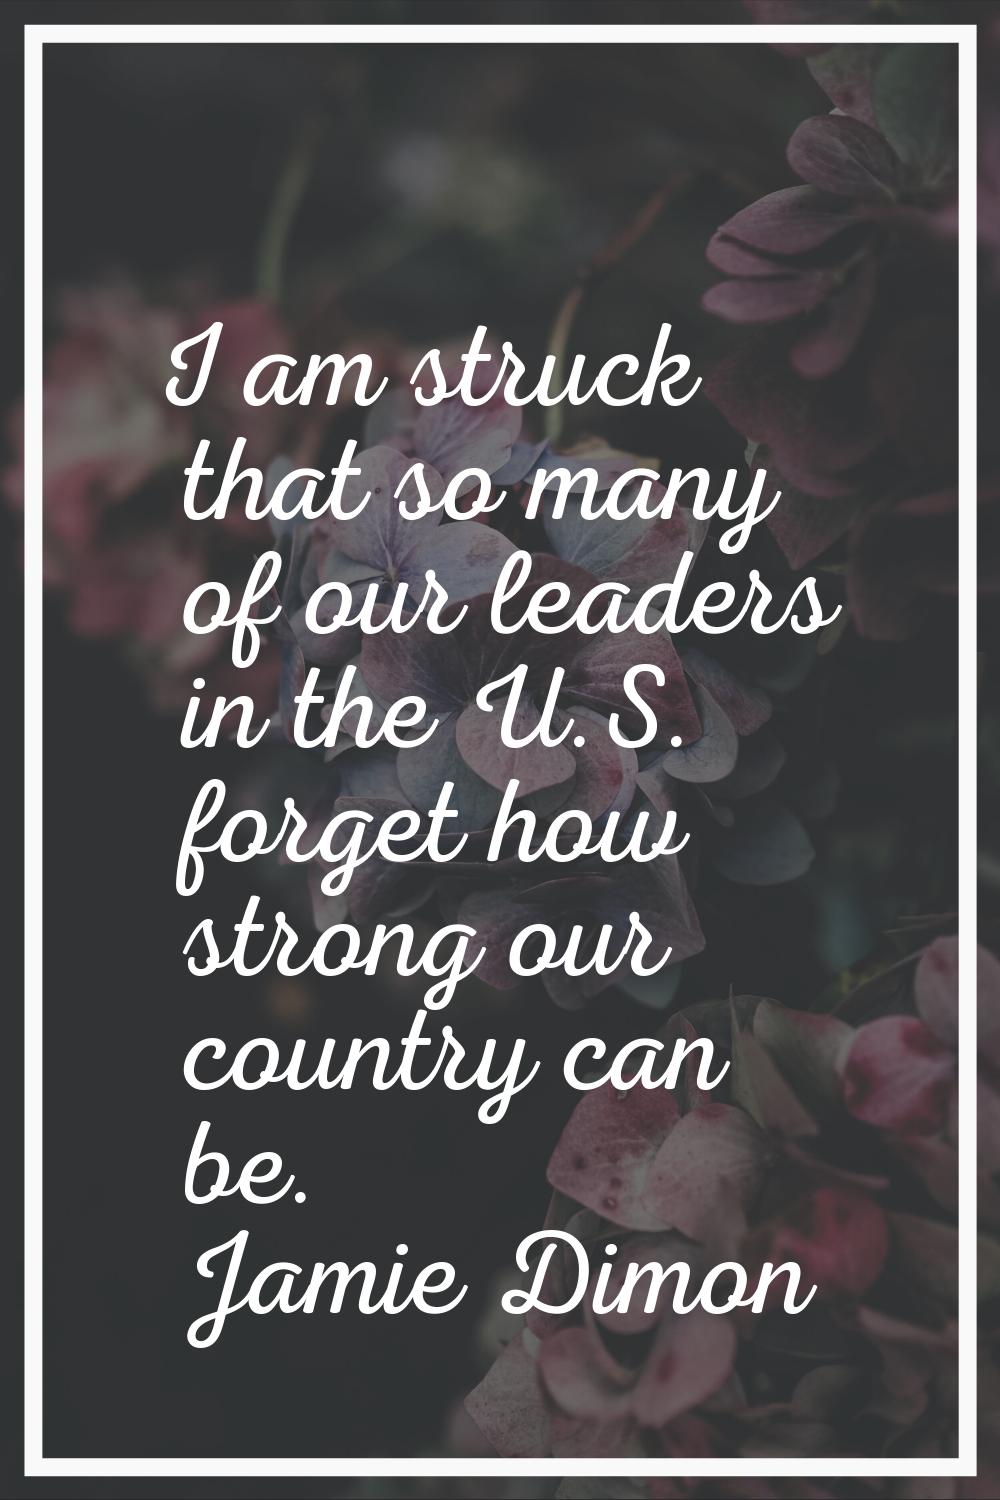 I am struck that so many of our leaders in the U.S. forget how strong our country can be.